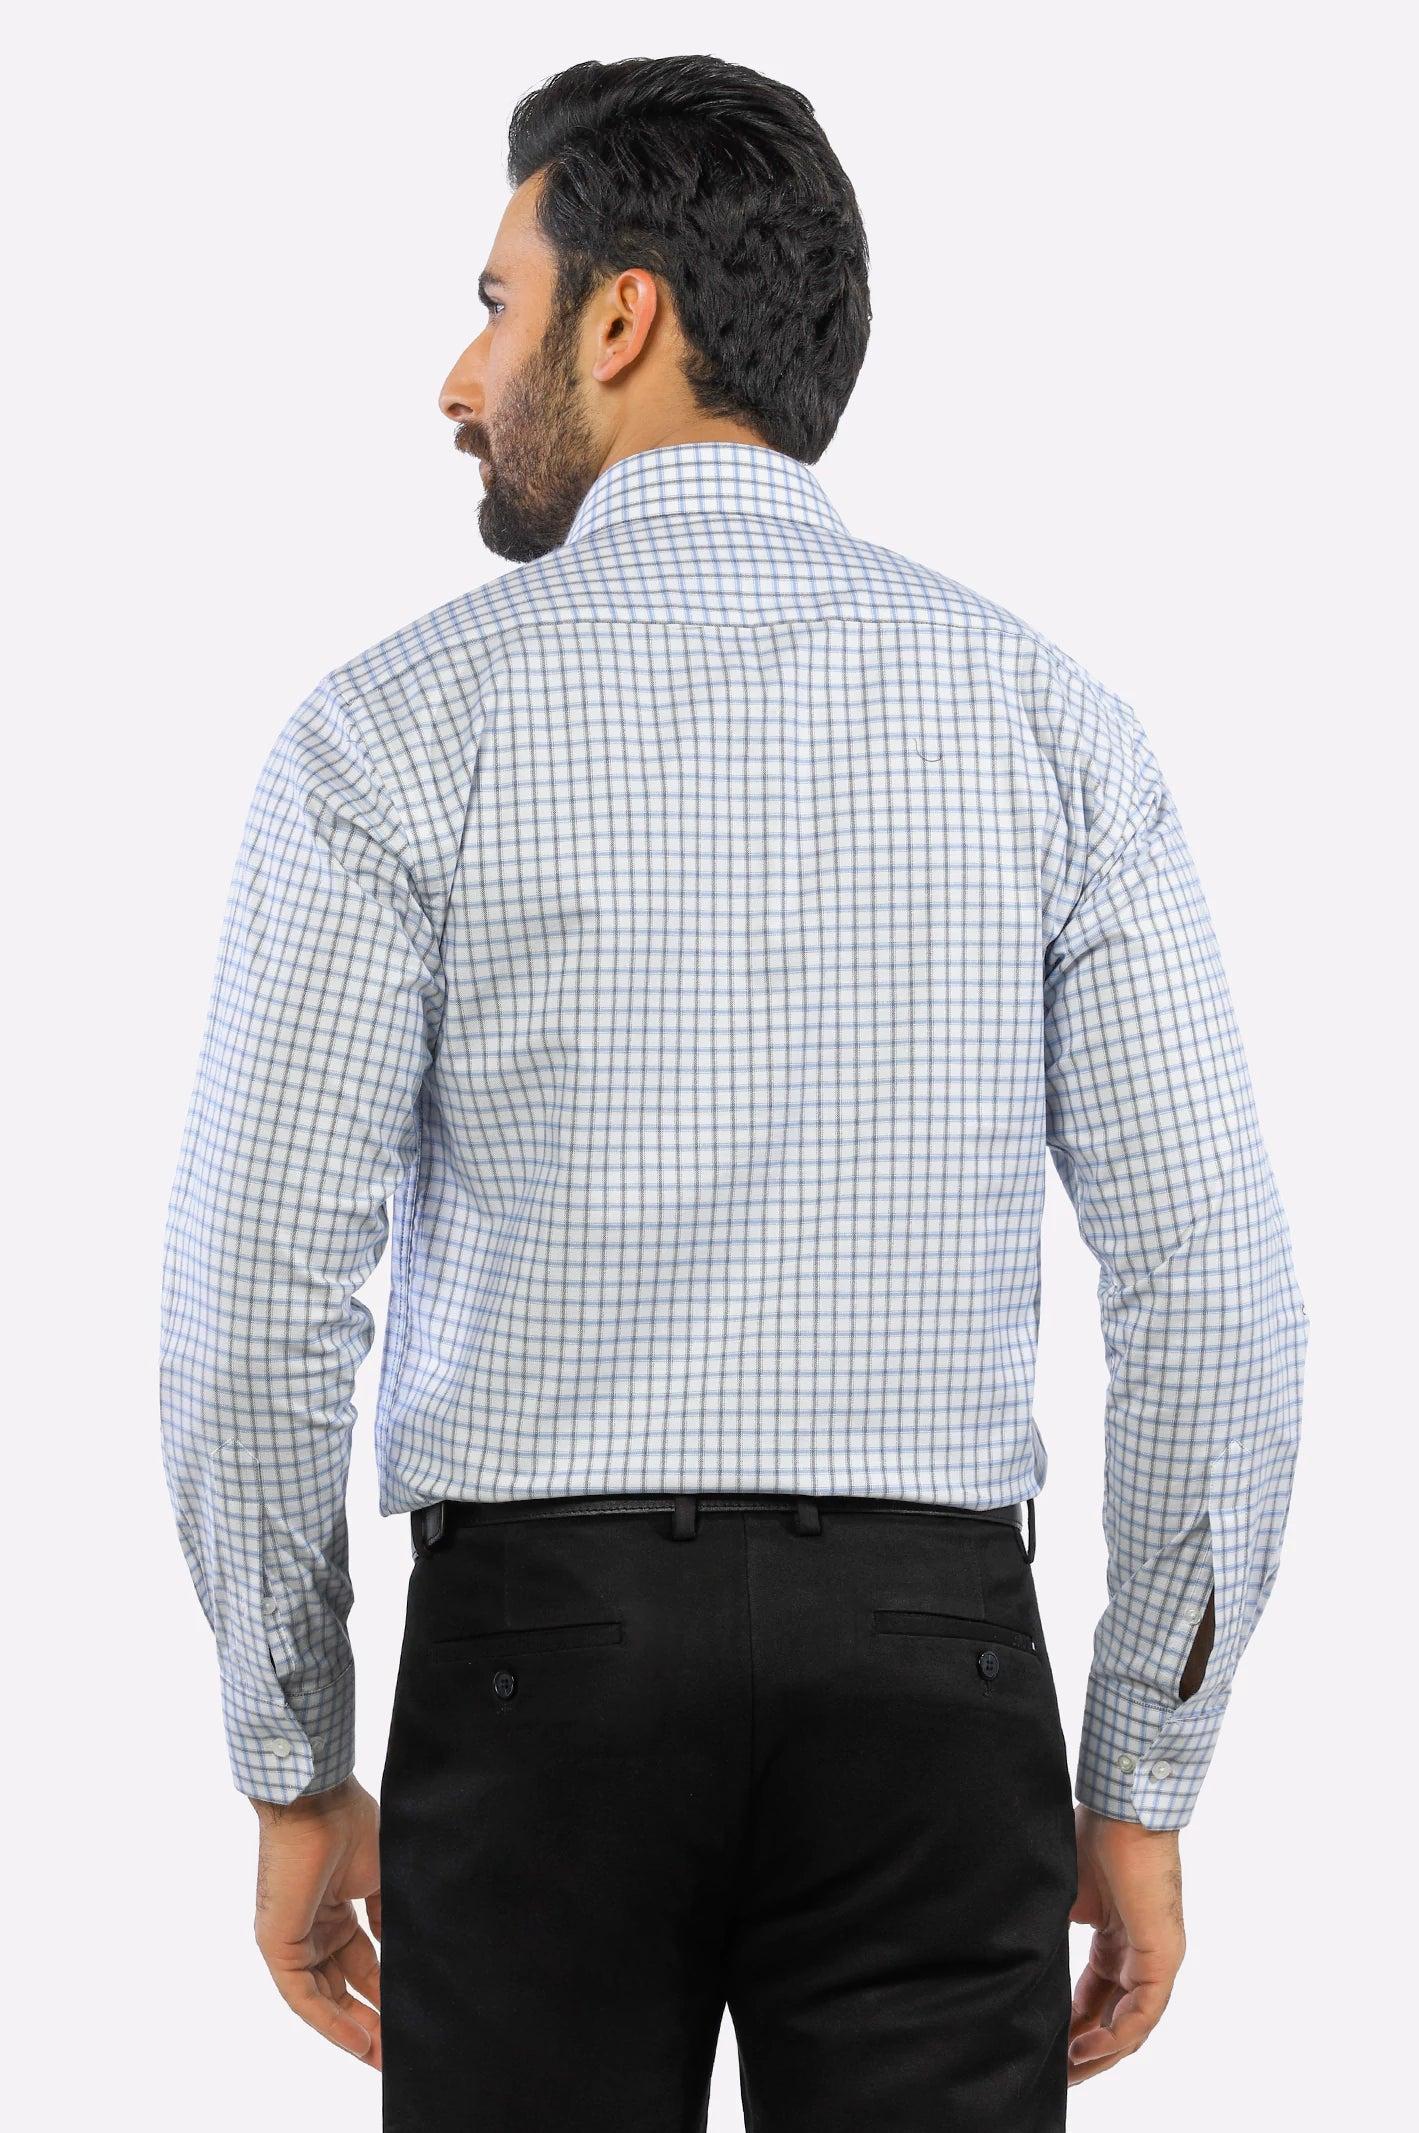 BLUE GRAPH CHECK FORMAL SHIRT | the FOR | UNDEFINED Generation MODERN THE MODJEN For DINERS - GENERATION modern | | Modjen